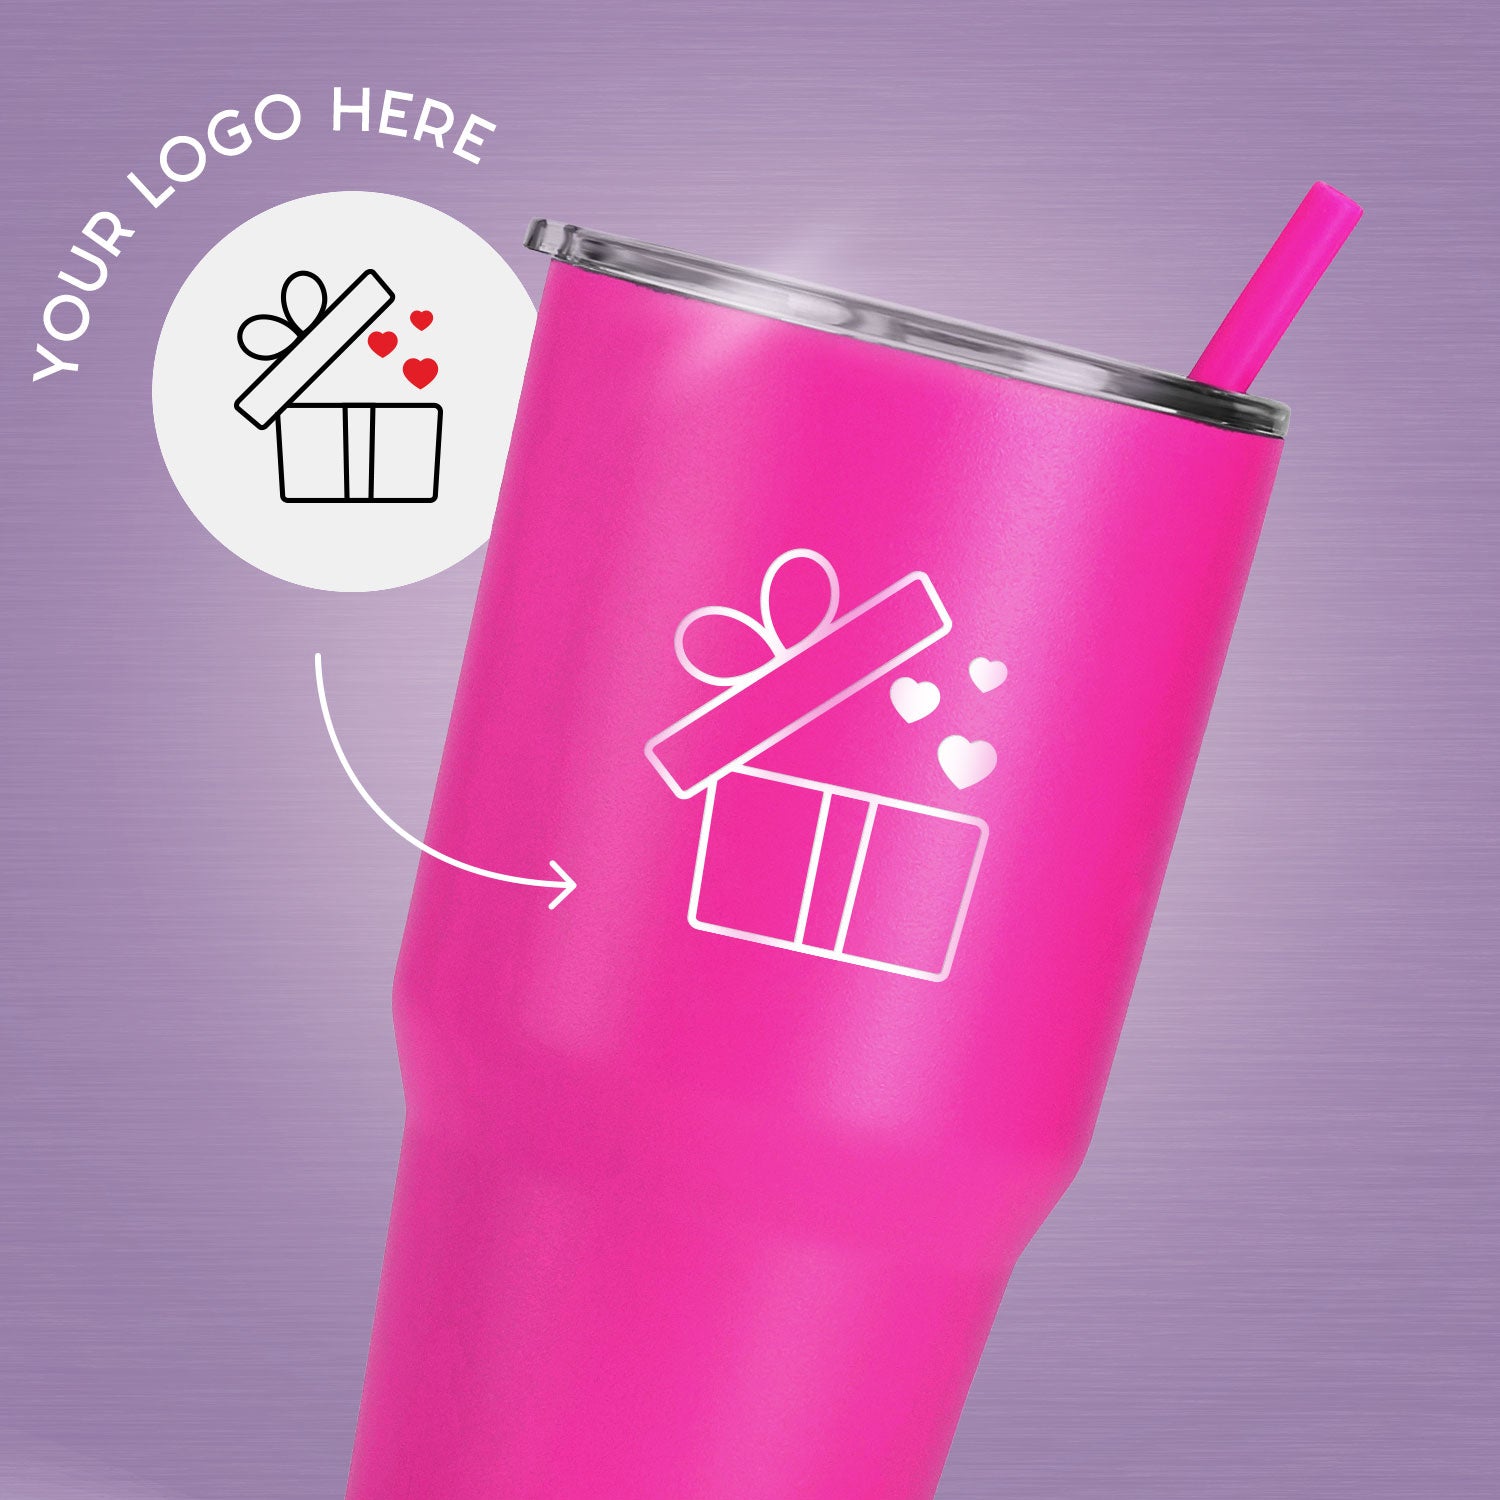 Engraved Tumblers for Bulk Purchase